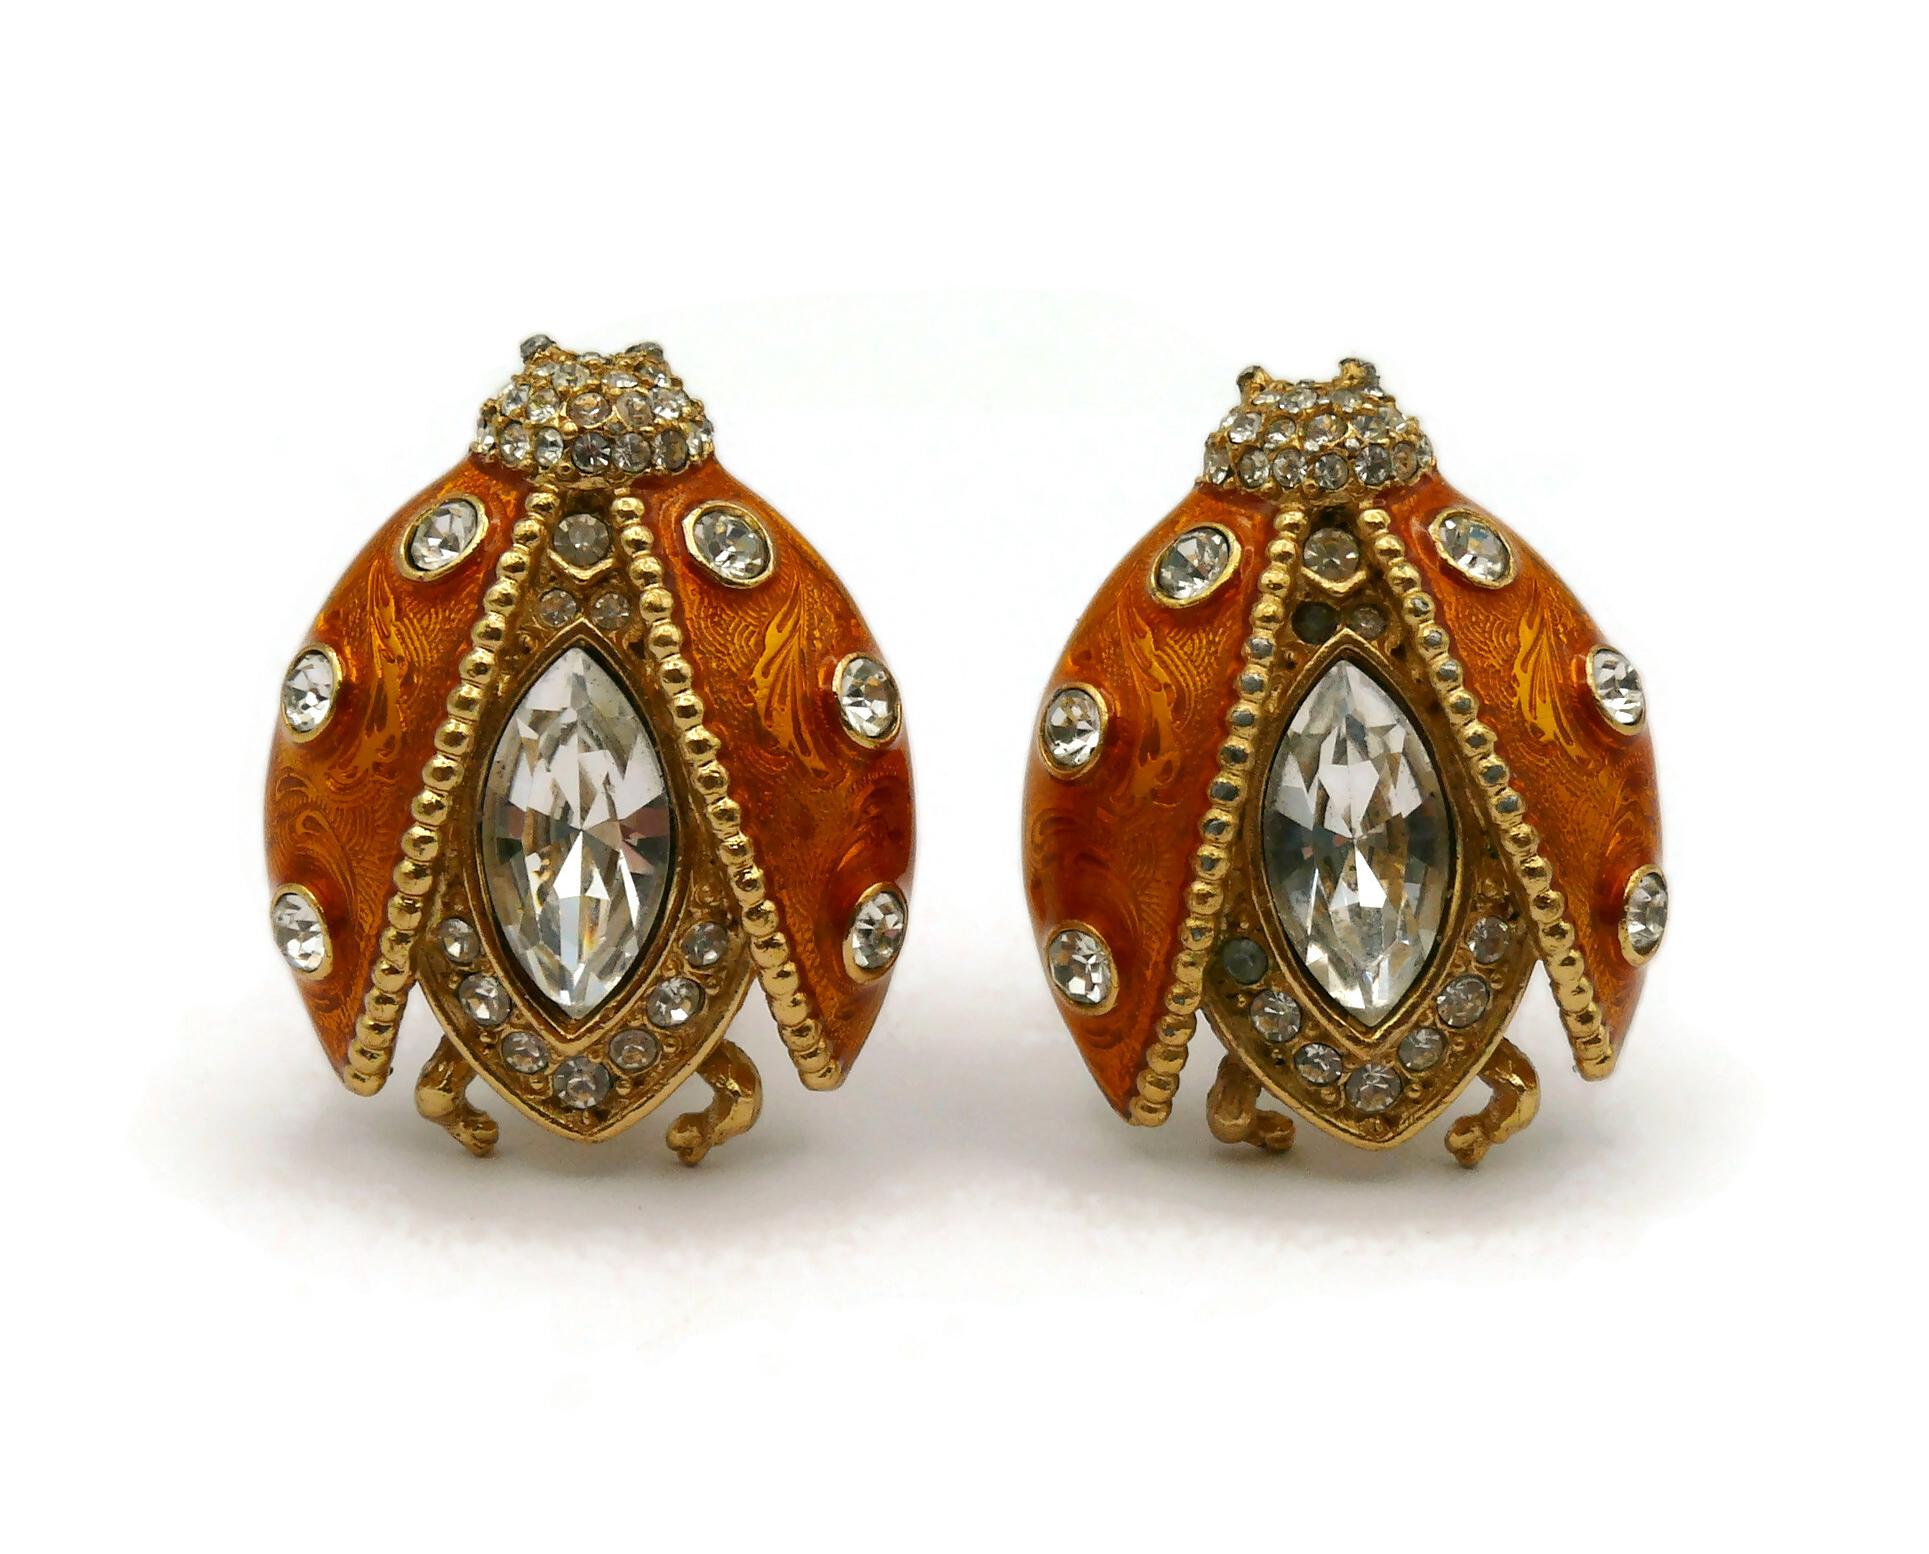 CHRISTIAN DIOR Boutique Iconic Jewelled Ladybug Clip-On Earrings In Fair Condition For Sale In Nice, FR